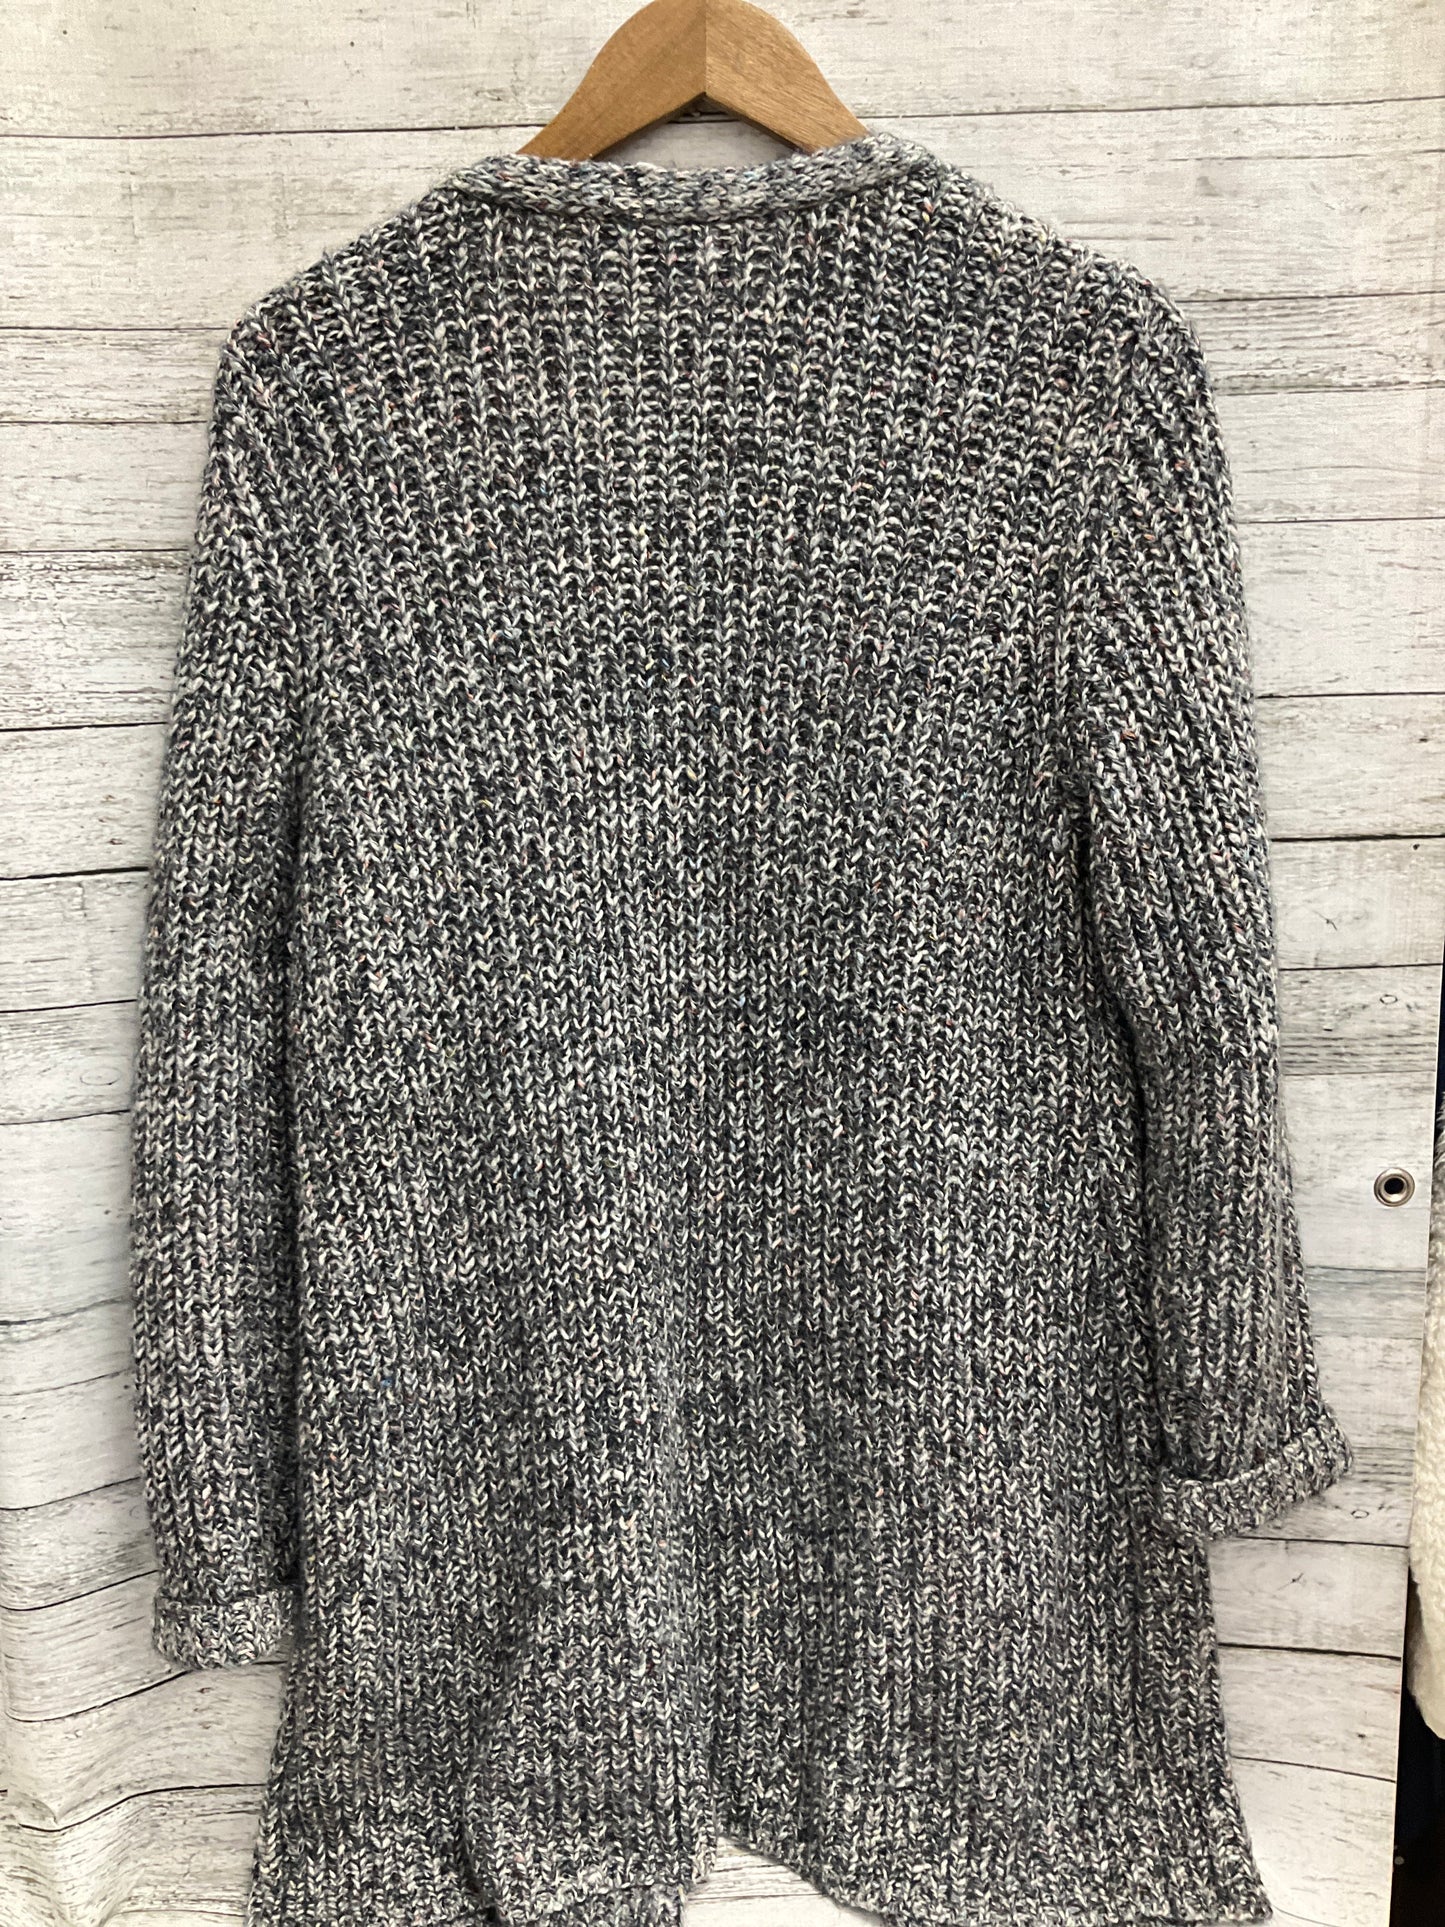 Sweater Cardigan By Christopher And Banks  Size: Petite Large